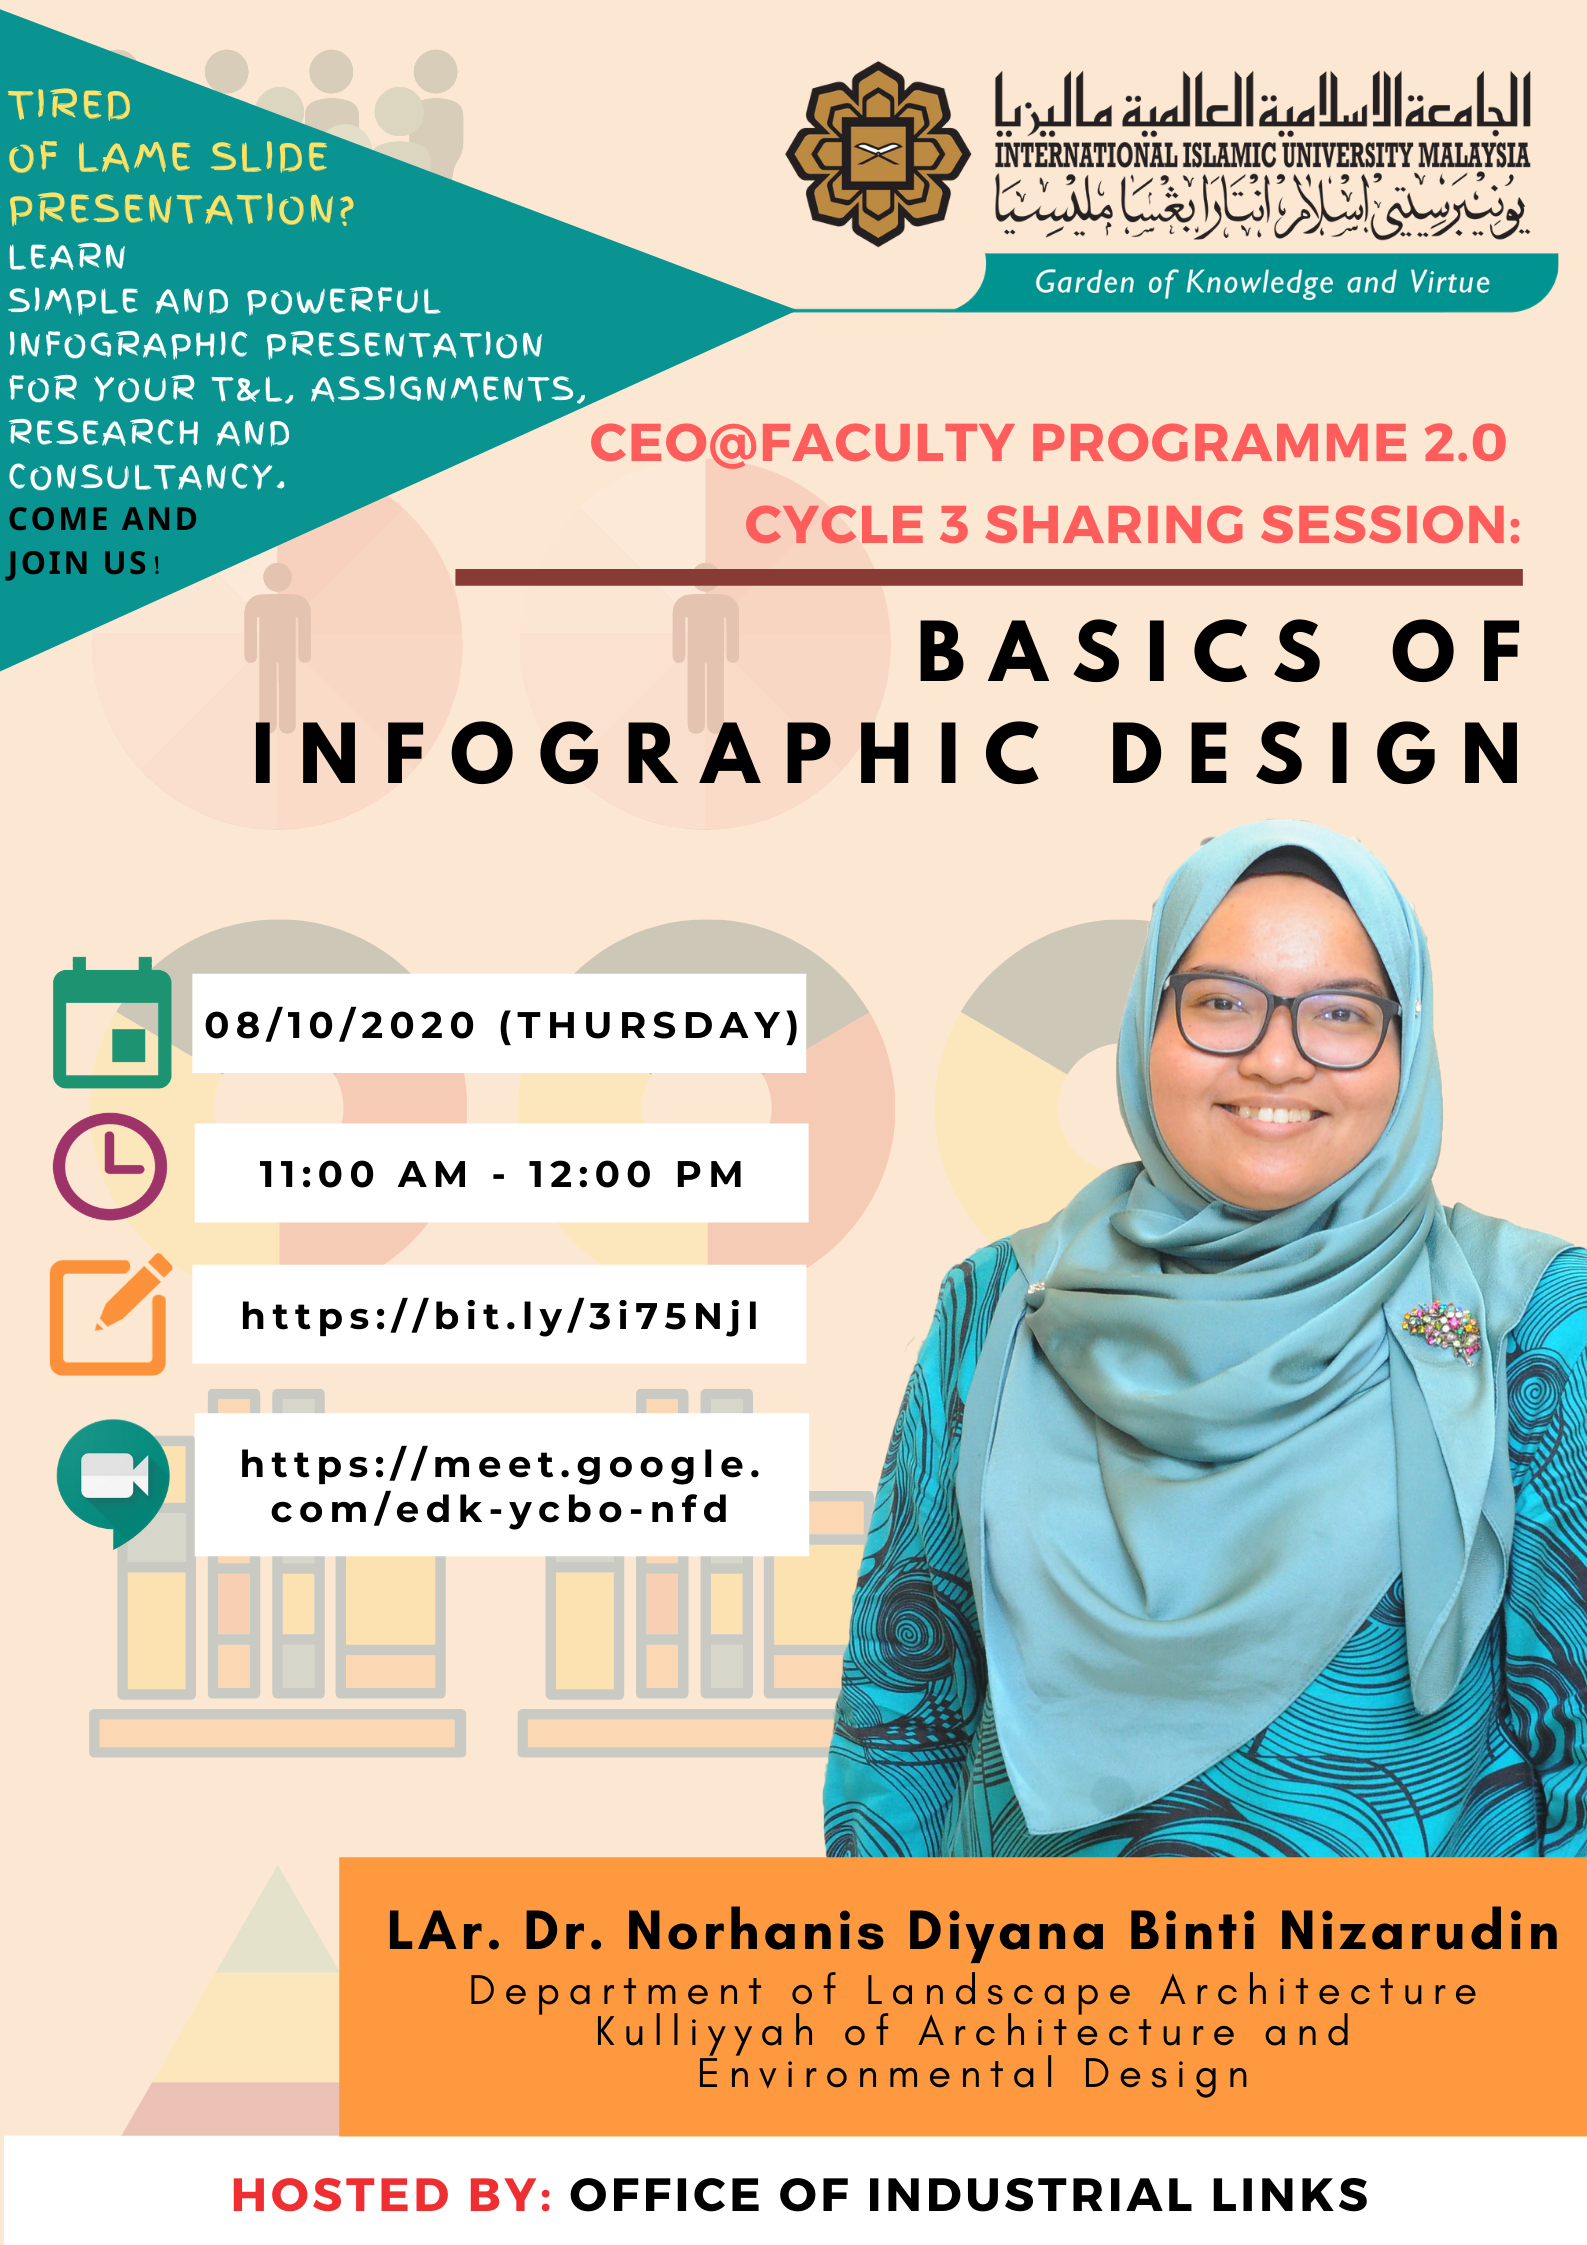 INVITATION TO ATTEND WEBINAR SESSION ON "CEO@FACULTY PROGRAMME 2.0 CYCLE 3 SHARING SESSION: BASICS OF INFOGRAPHIC DESIGN"